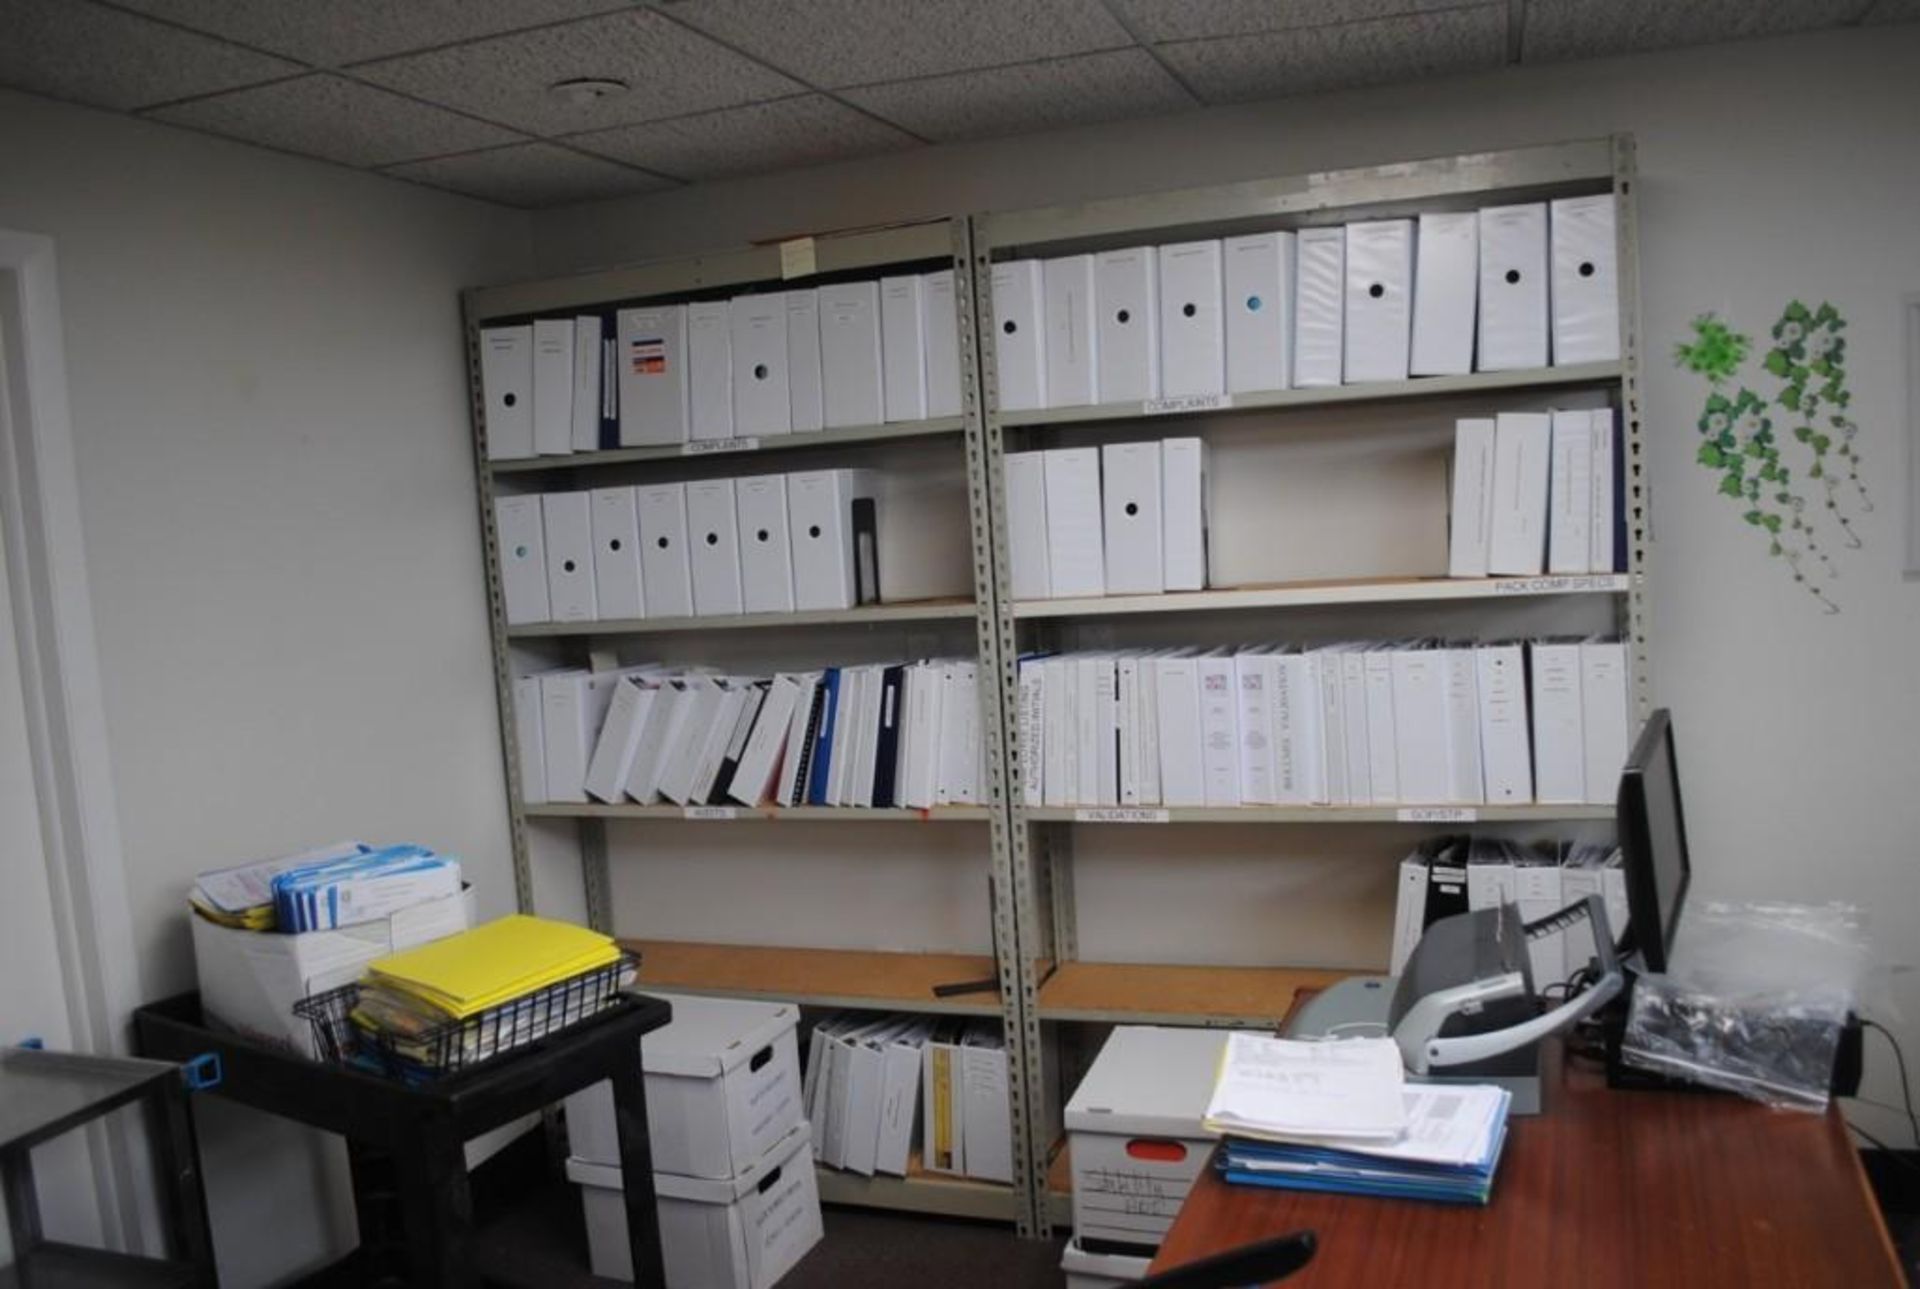 Office Furniture in storage room. - Image 36 of 37